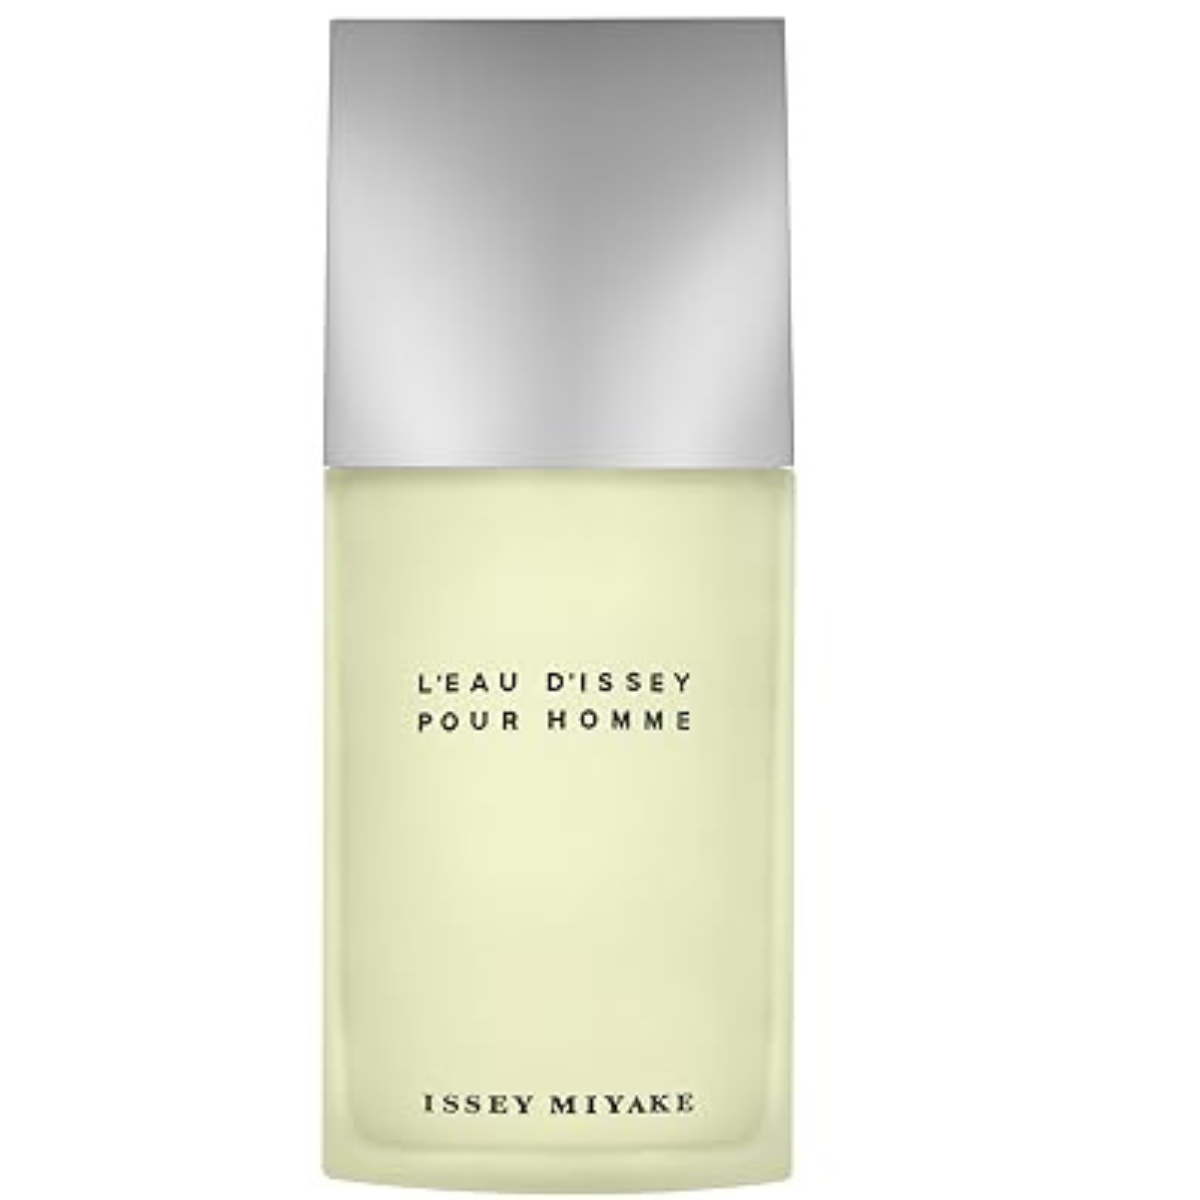 Issey Miyake Pour Homme 125 ml for Men